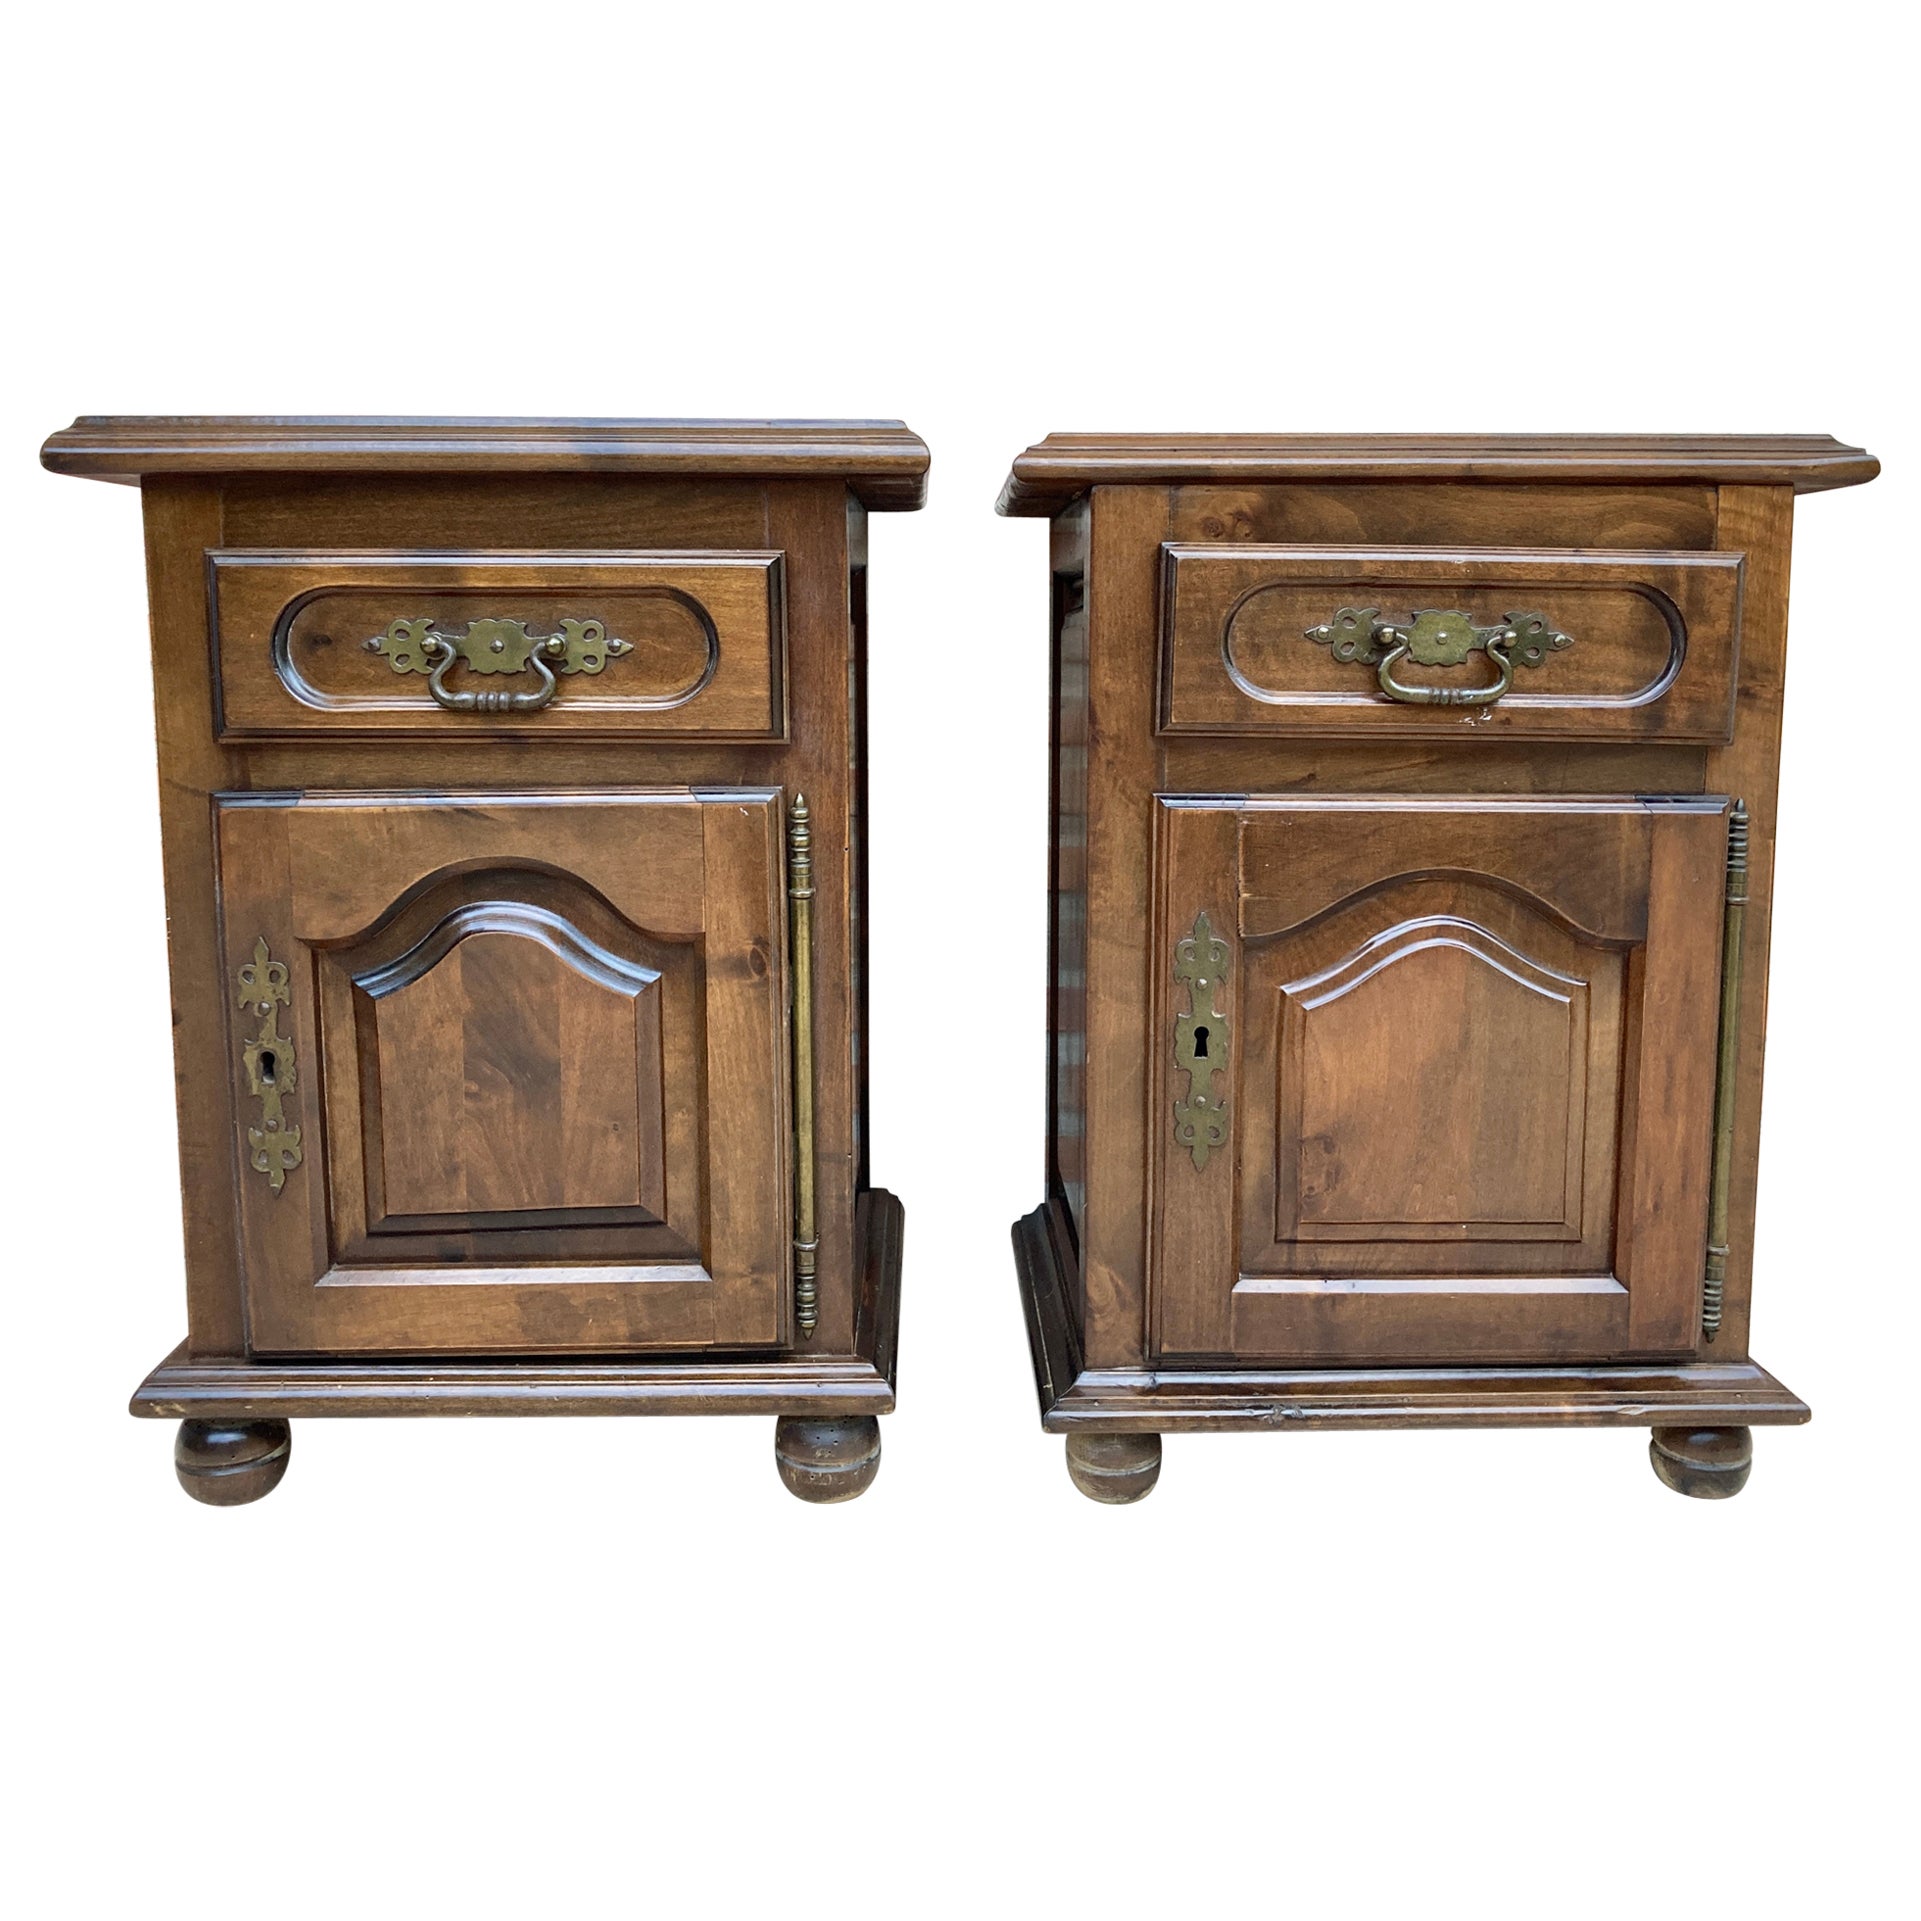 20th Spanish Nightstands with Drawer & Bronze Details, 1920, Set of 2